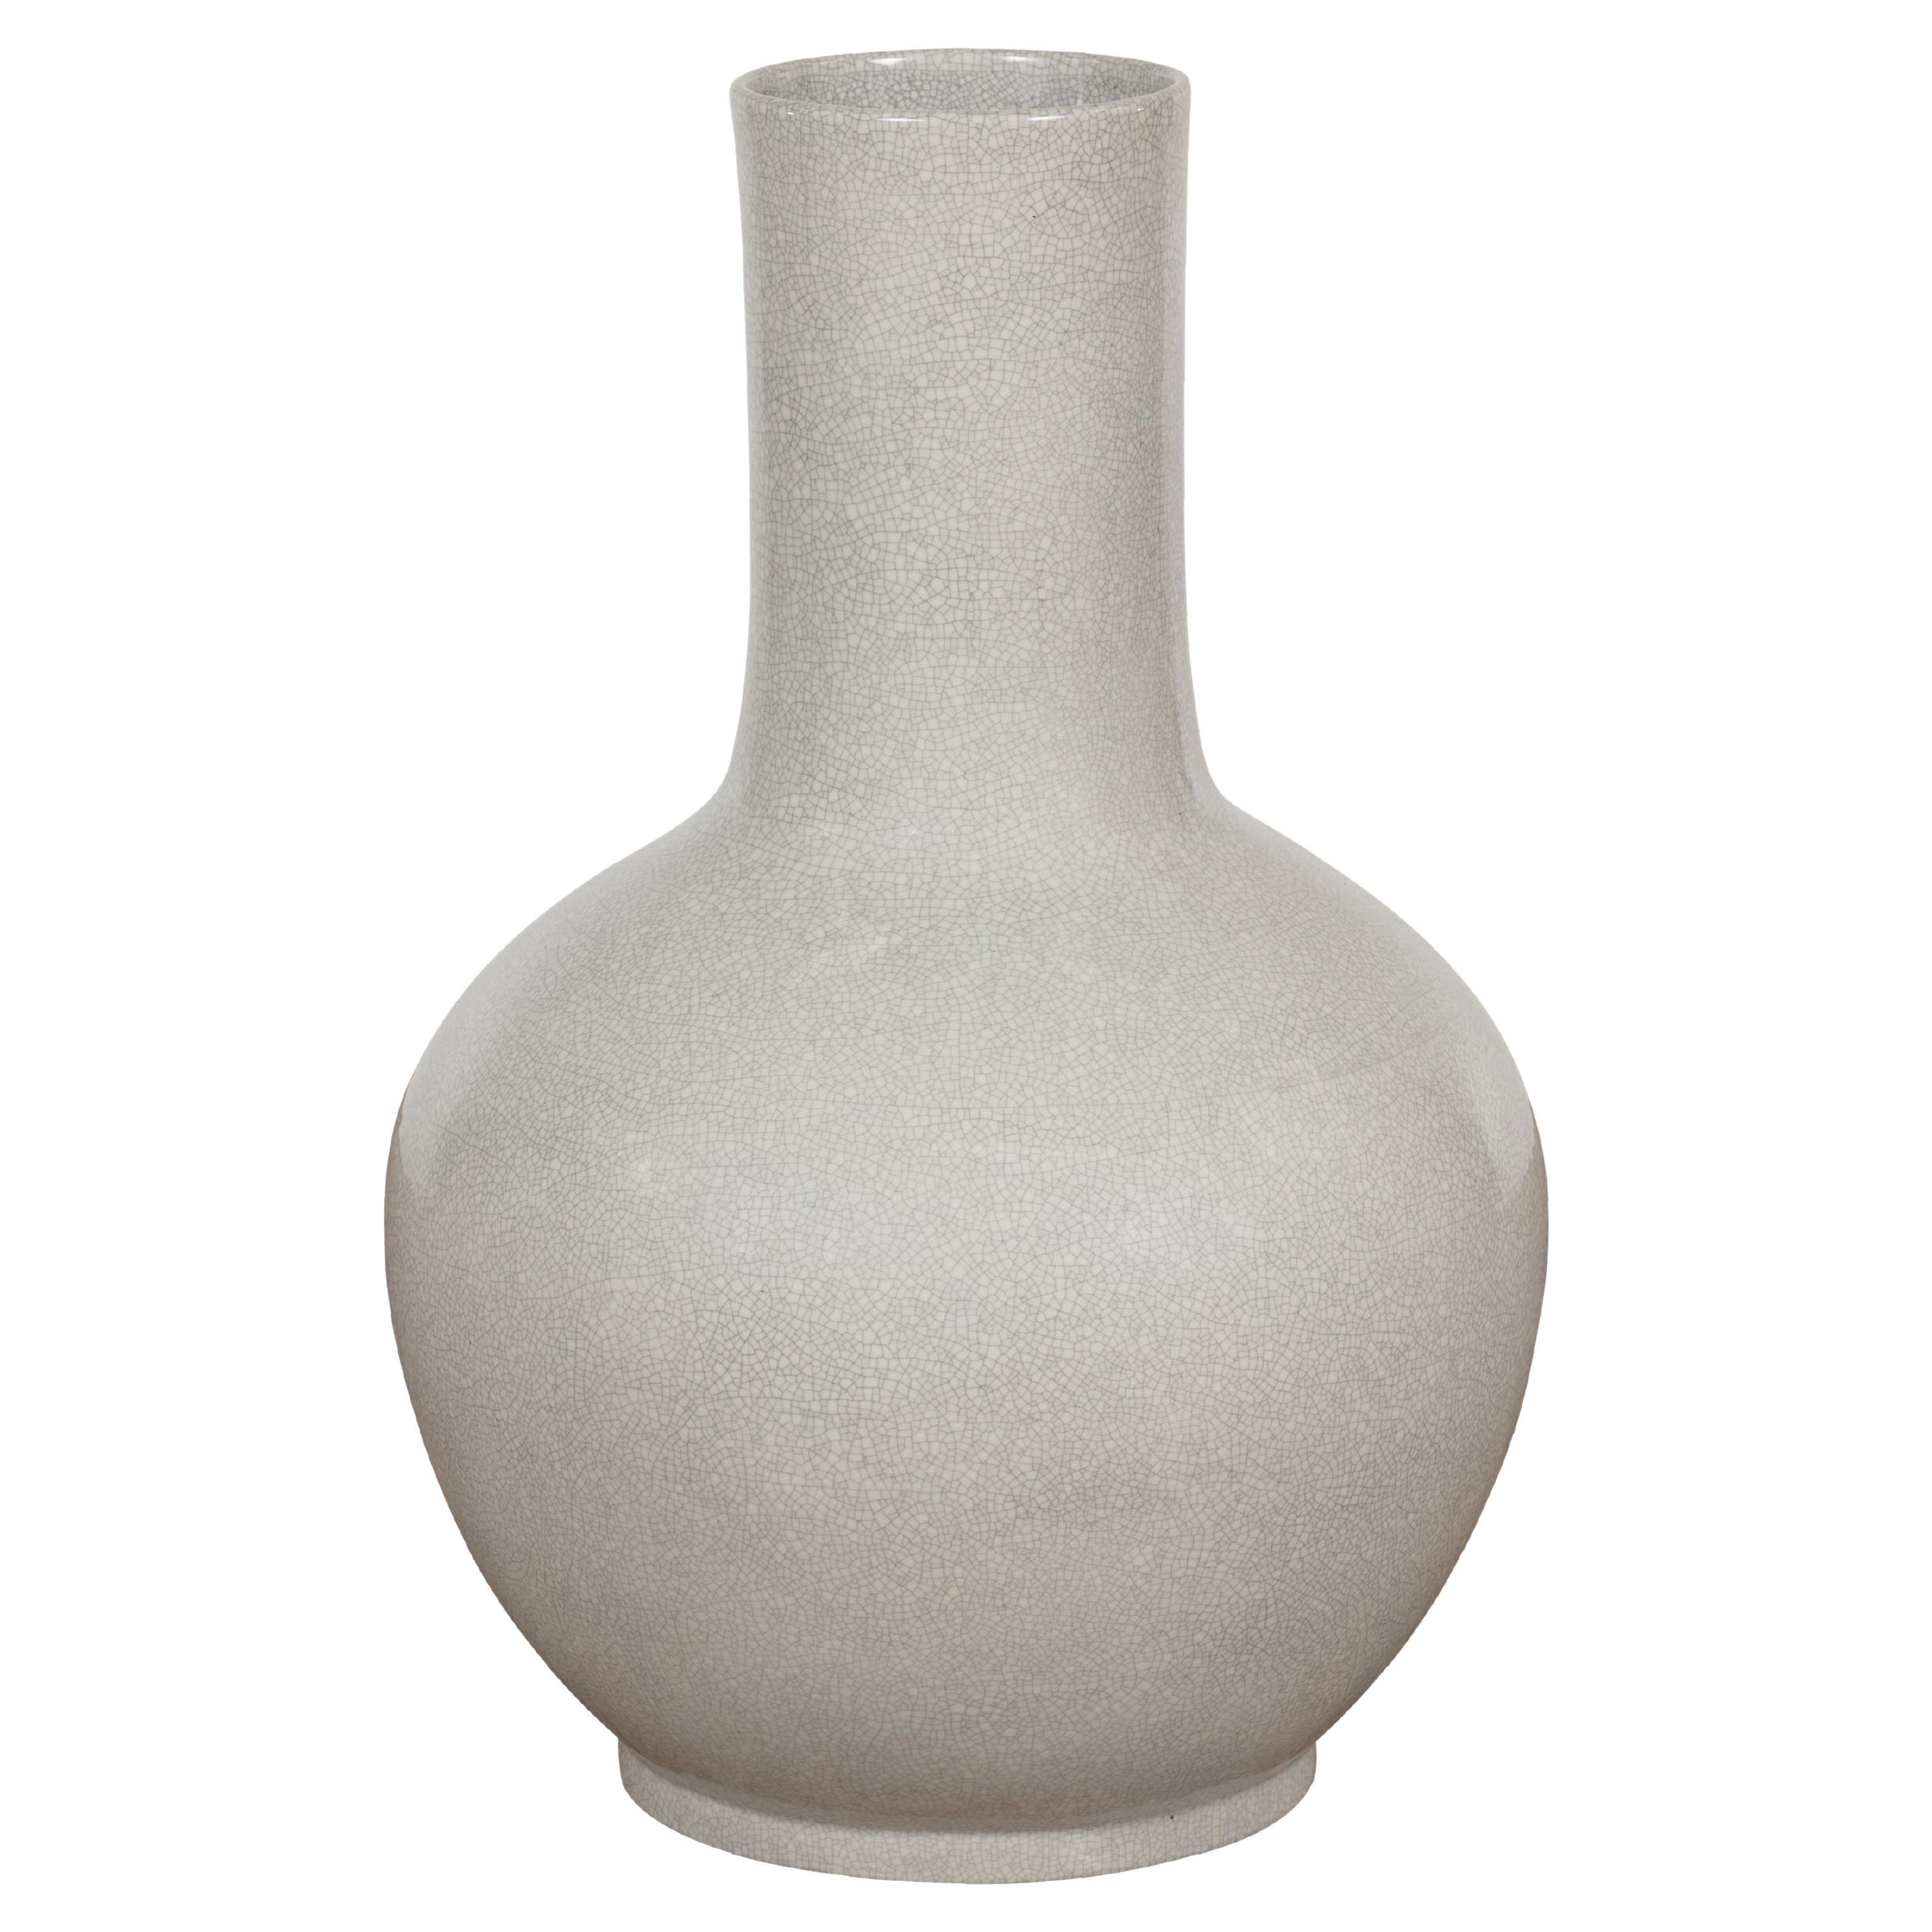 Chinese Vintage Kendi Shape Vase with Crackle Grey and White Finish For Sale